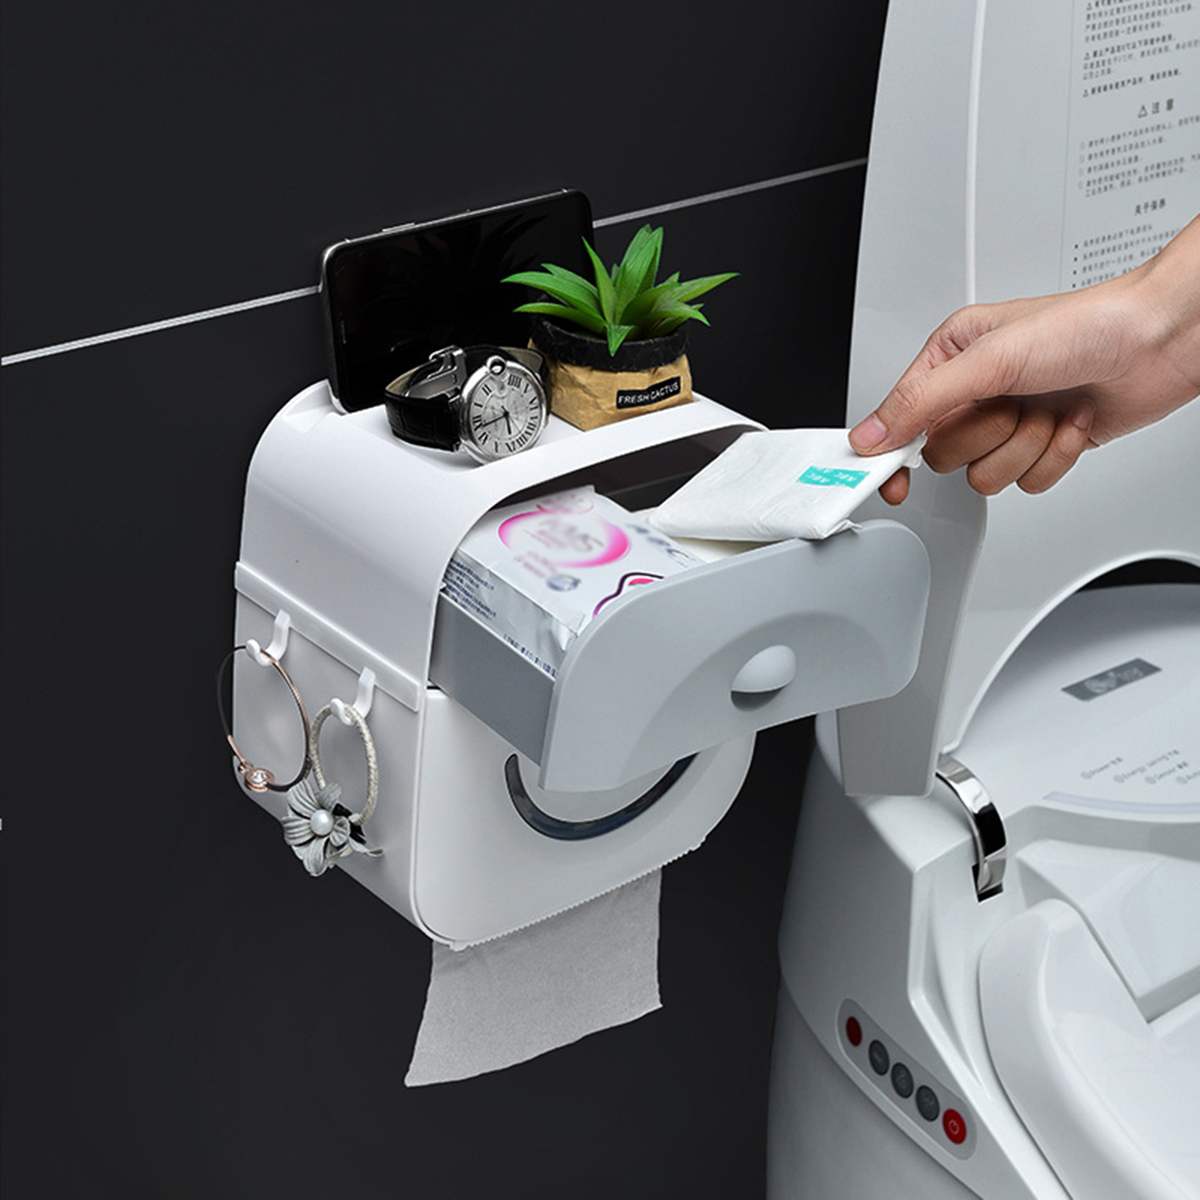 Portable Toilet Paper Holders Waterproof Single/Double Layer Wall Mounted Storage Box Paper Holder For Bathroom And Toilet